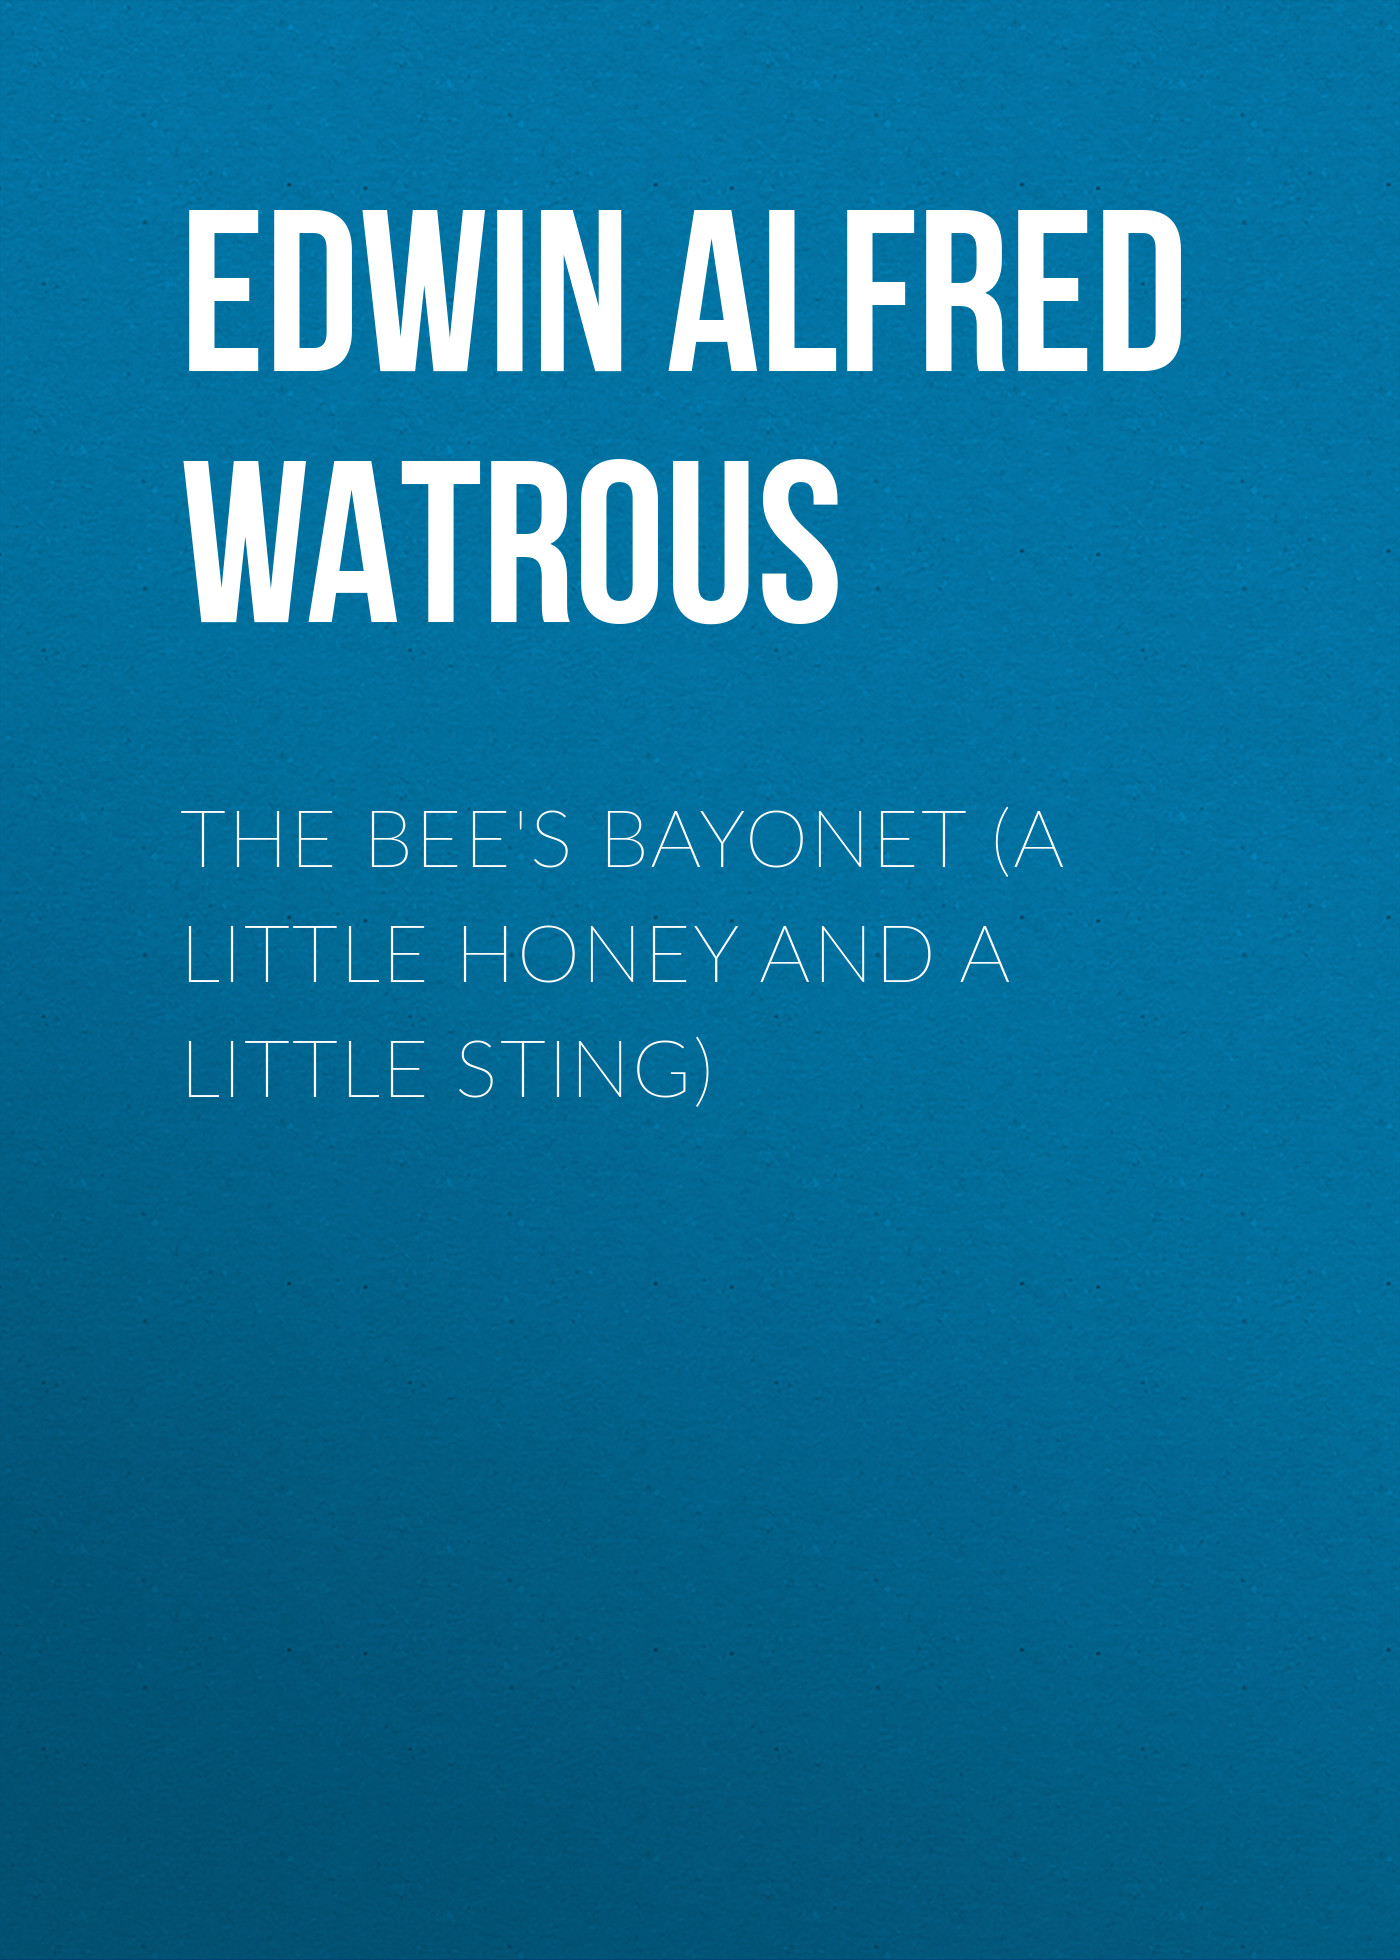 The Bee's Bayonet (a Little Honey and a Little Sting)